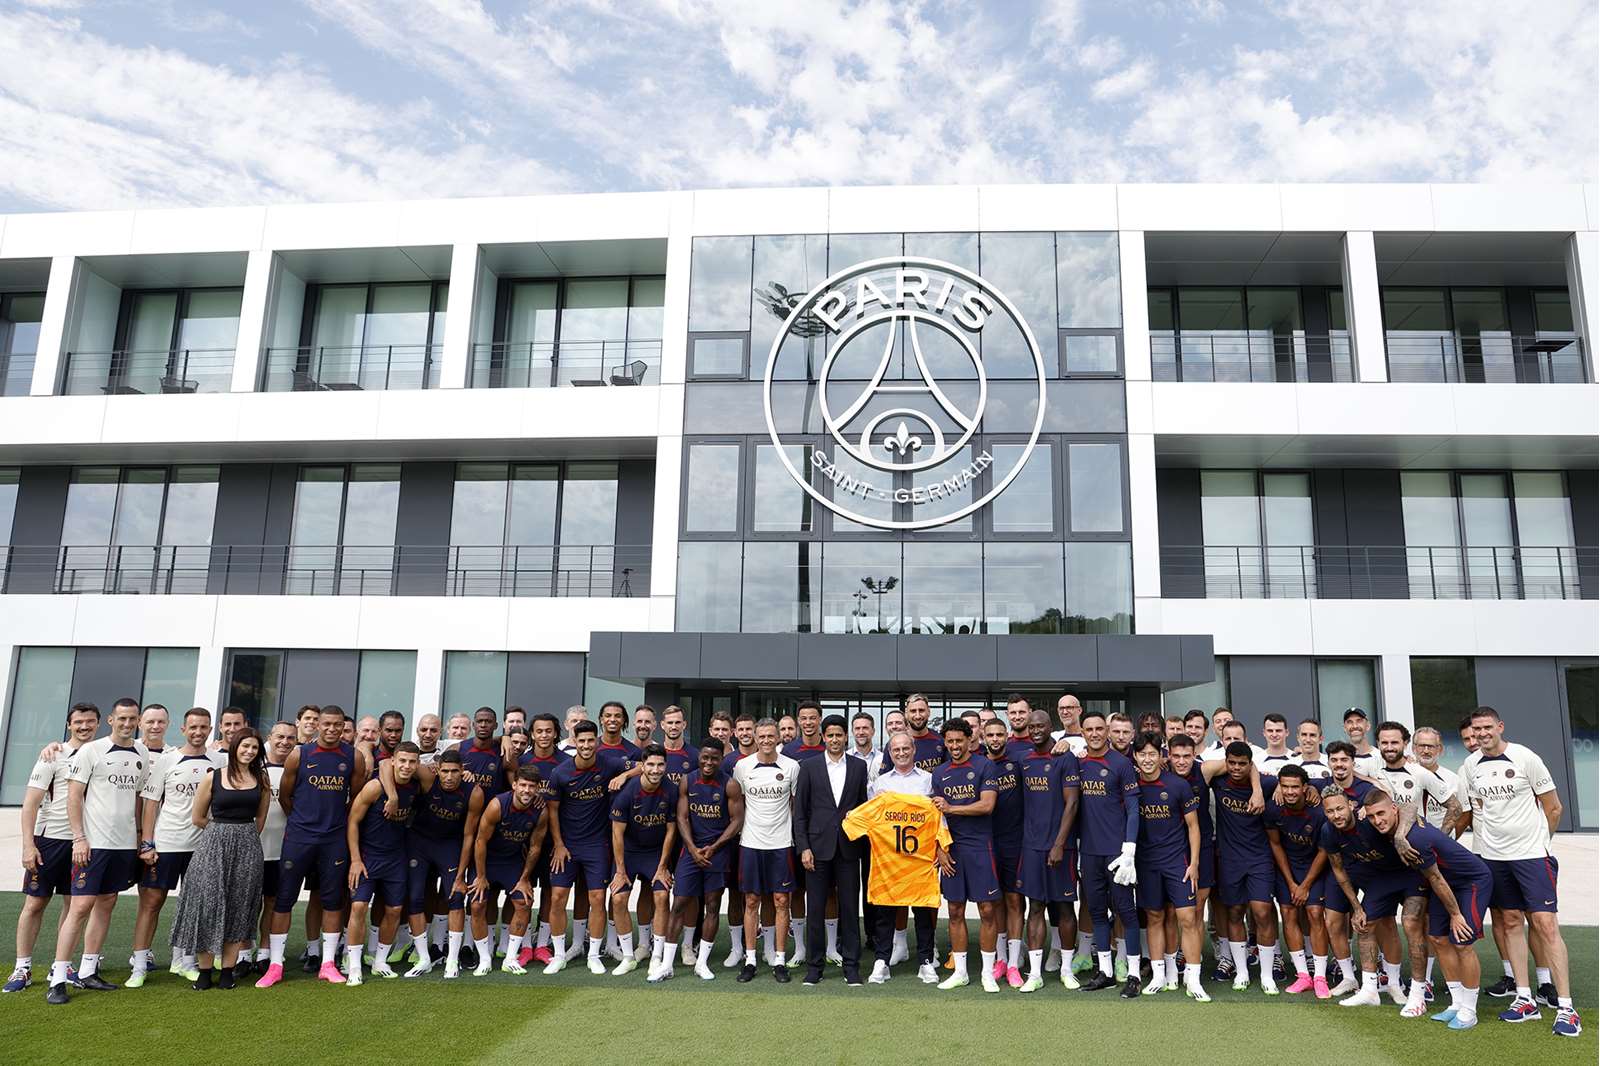 First group session at the PSG Campus